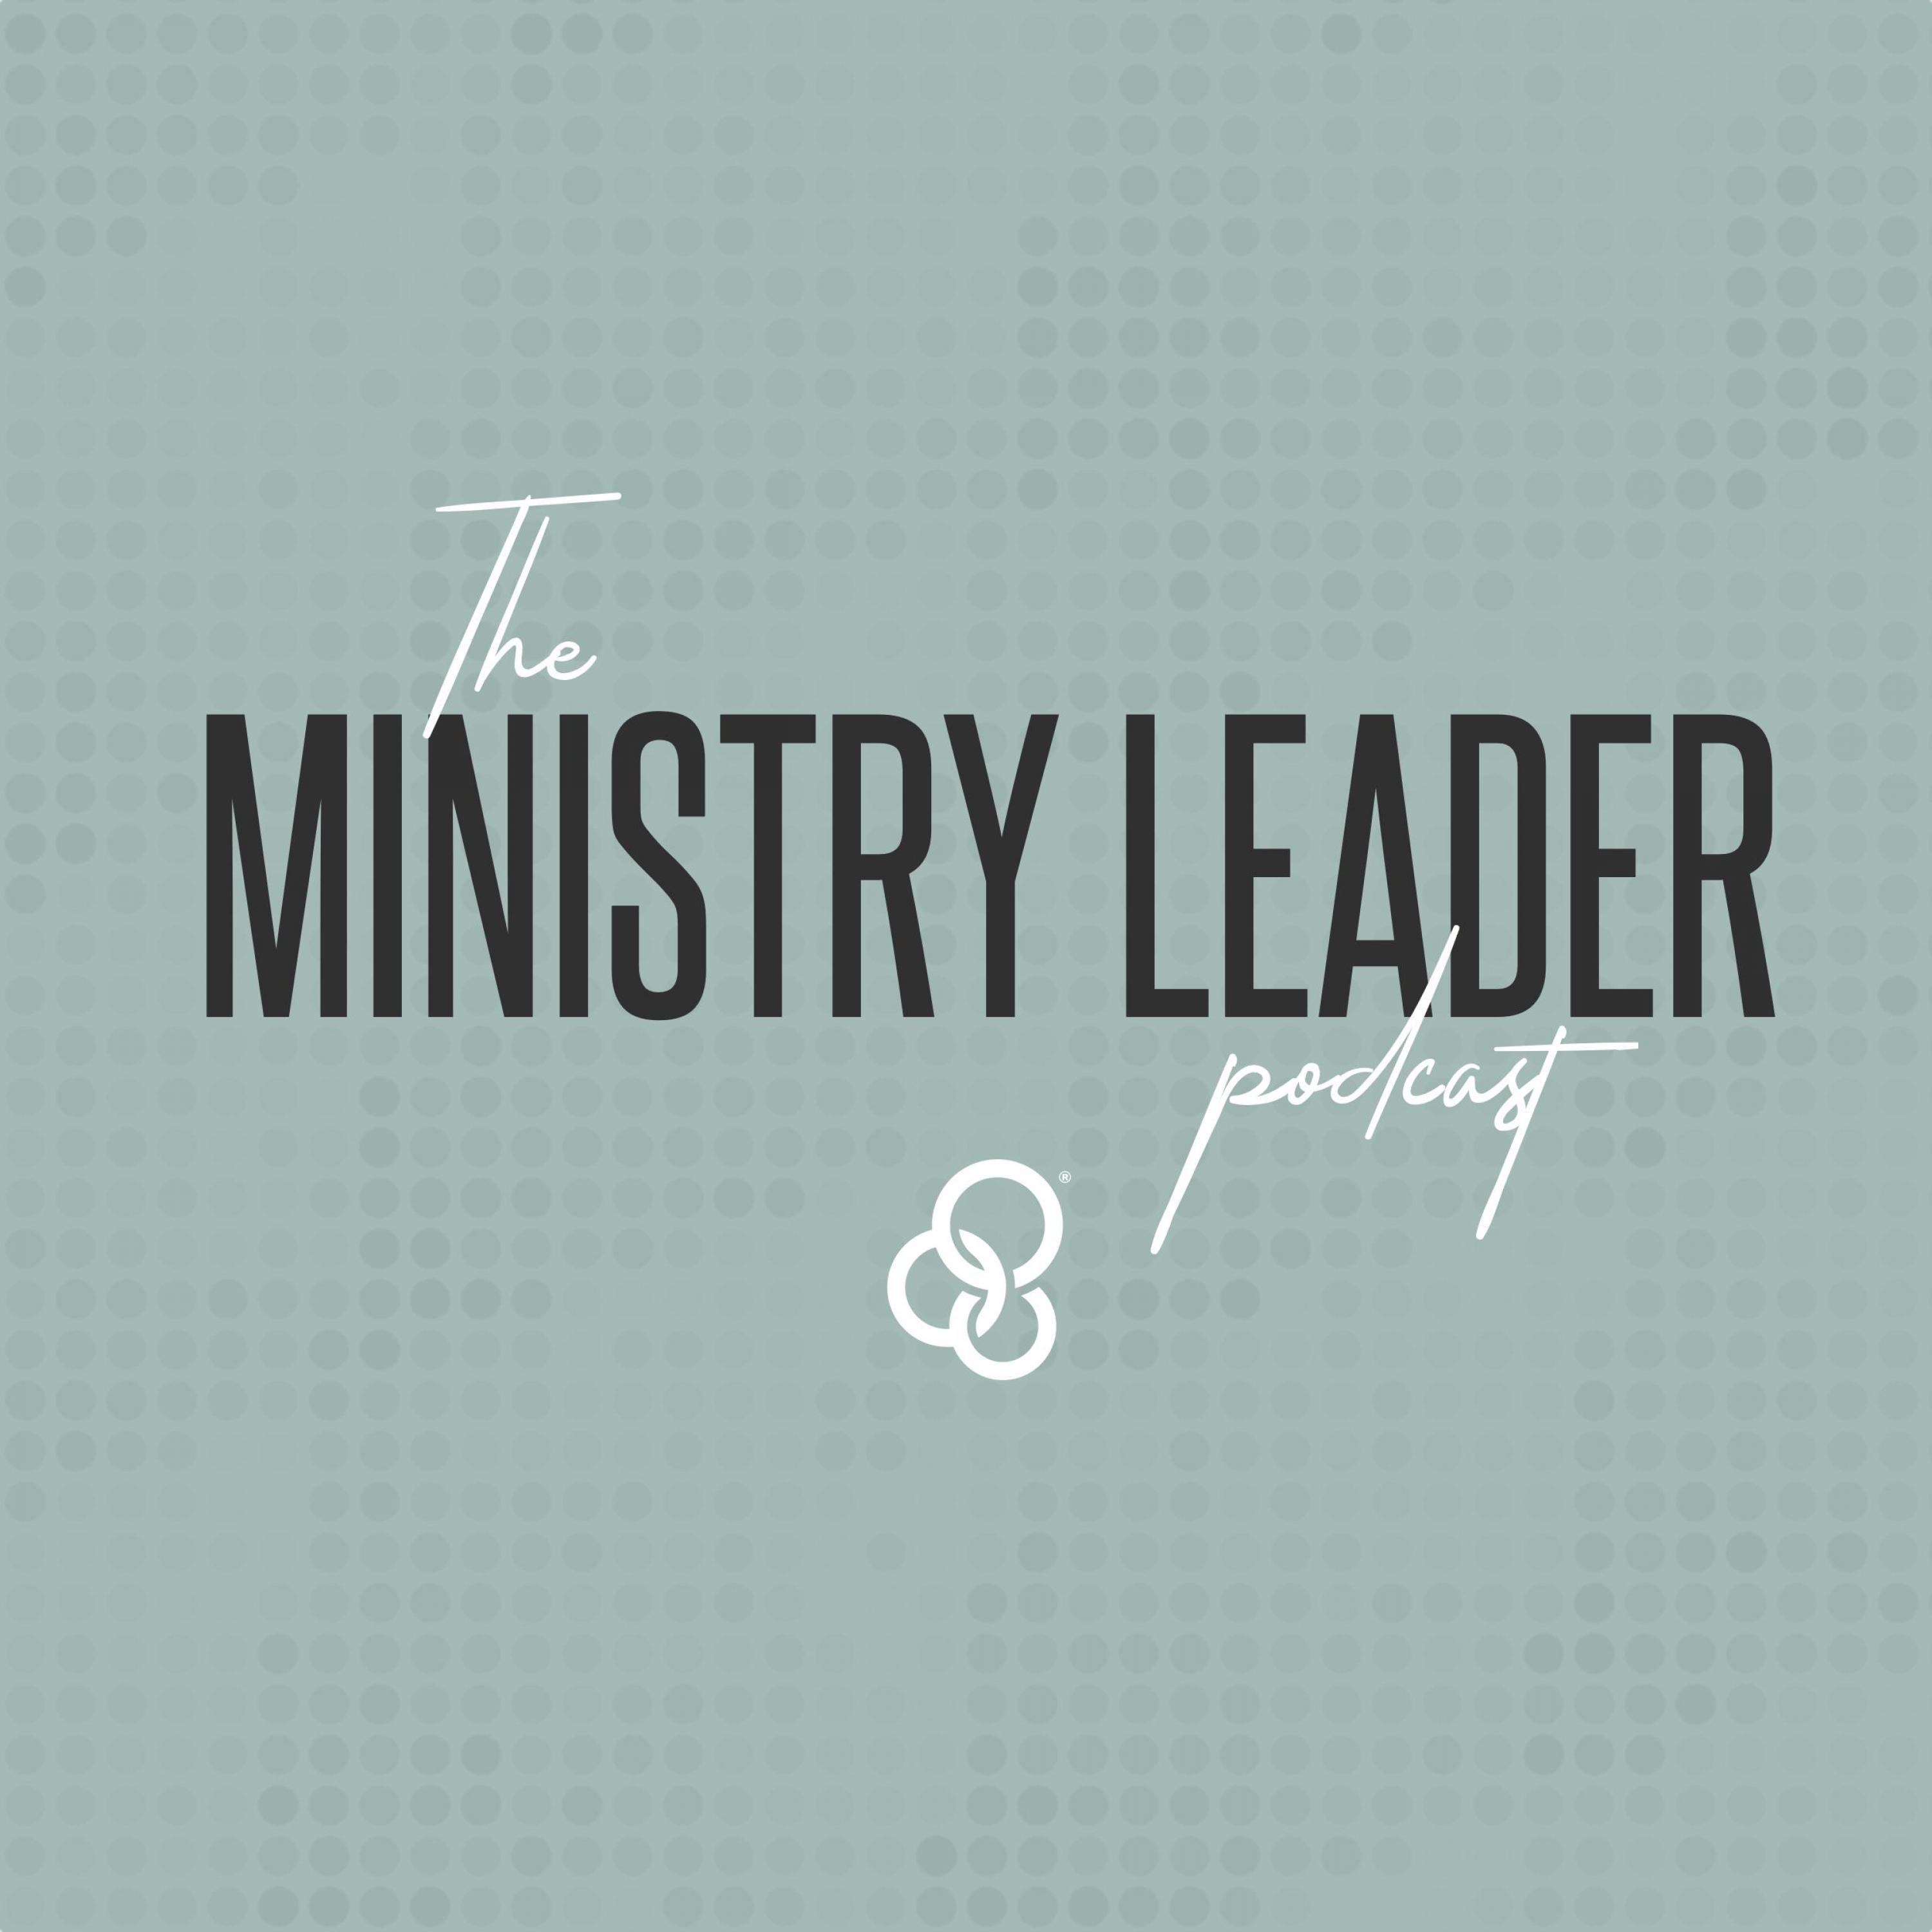 THE MINISTRY LEADER PODCAST